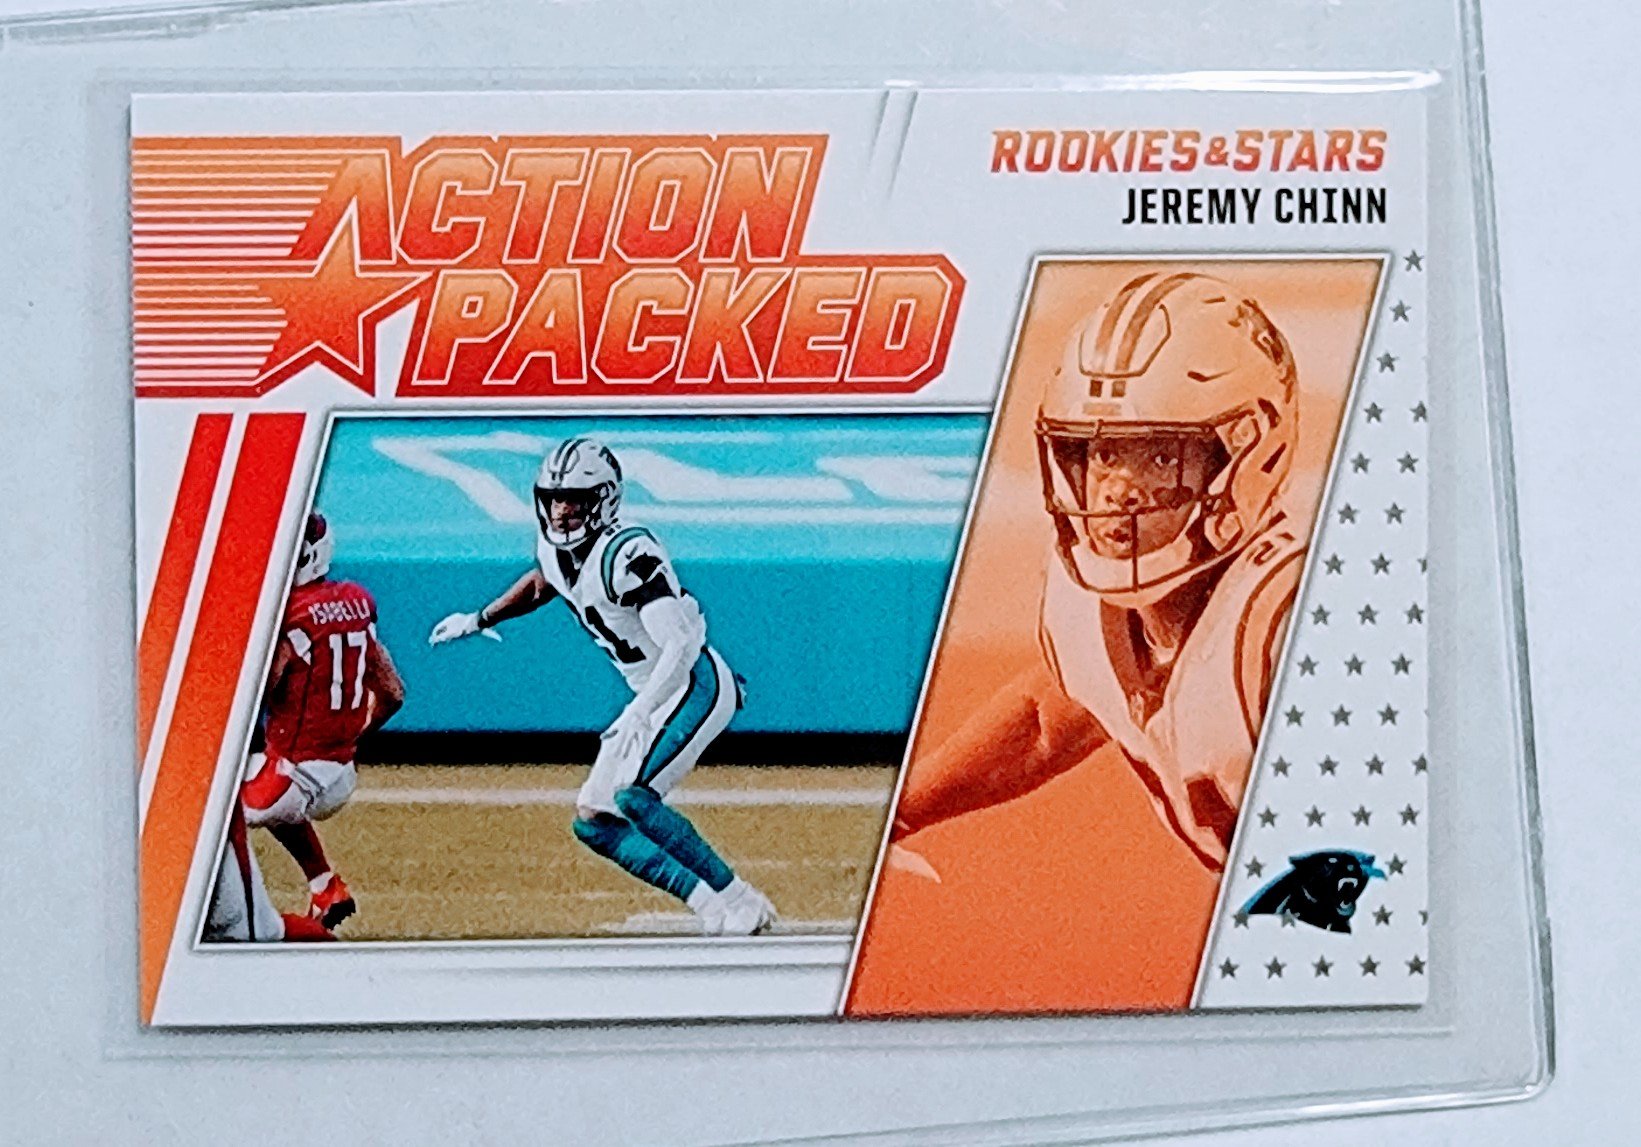 2021 Panini Rookies and Stars Jeremy Chinn Action Packed Insert Football Card AVM1 simple Xclusive Collectibles   